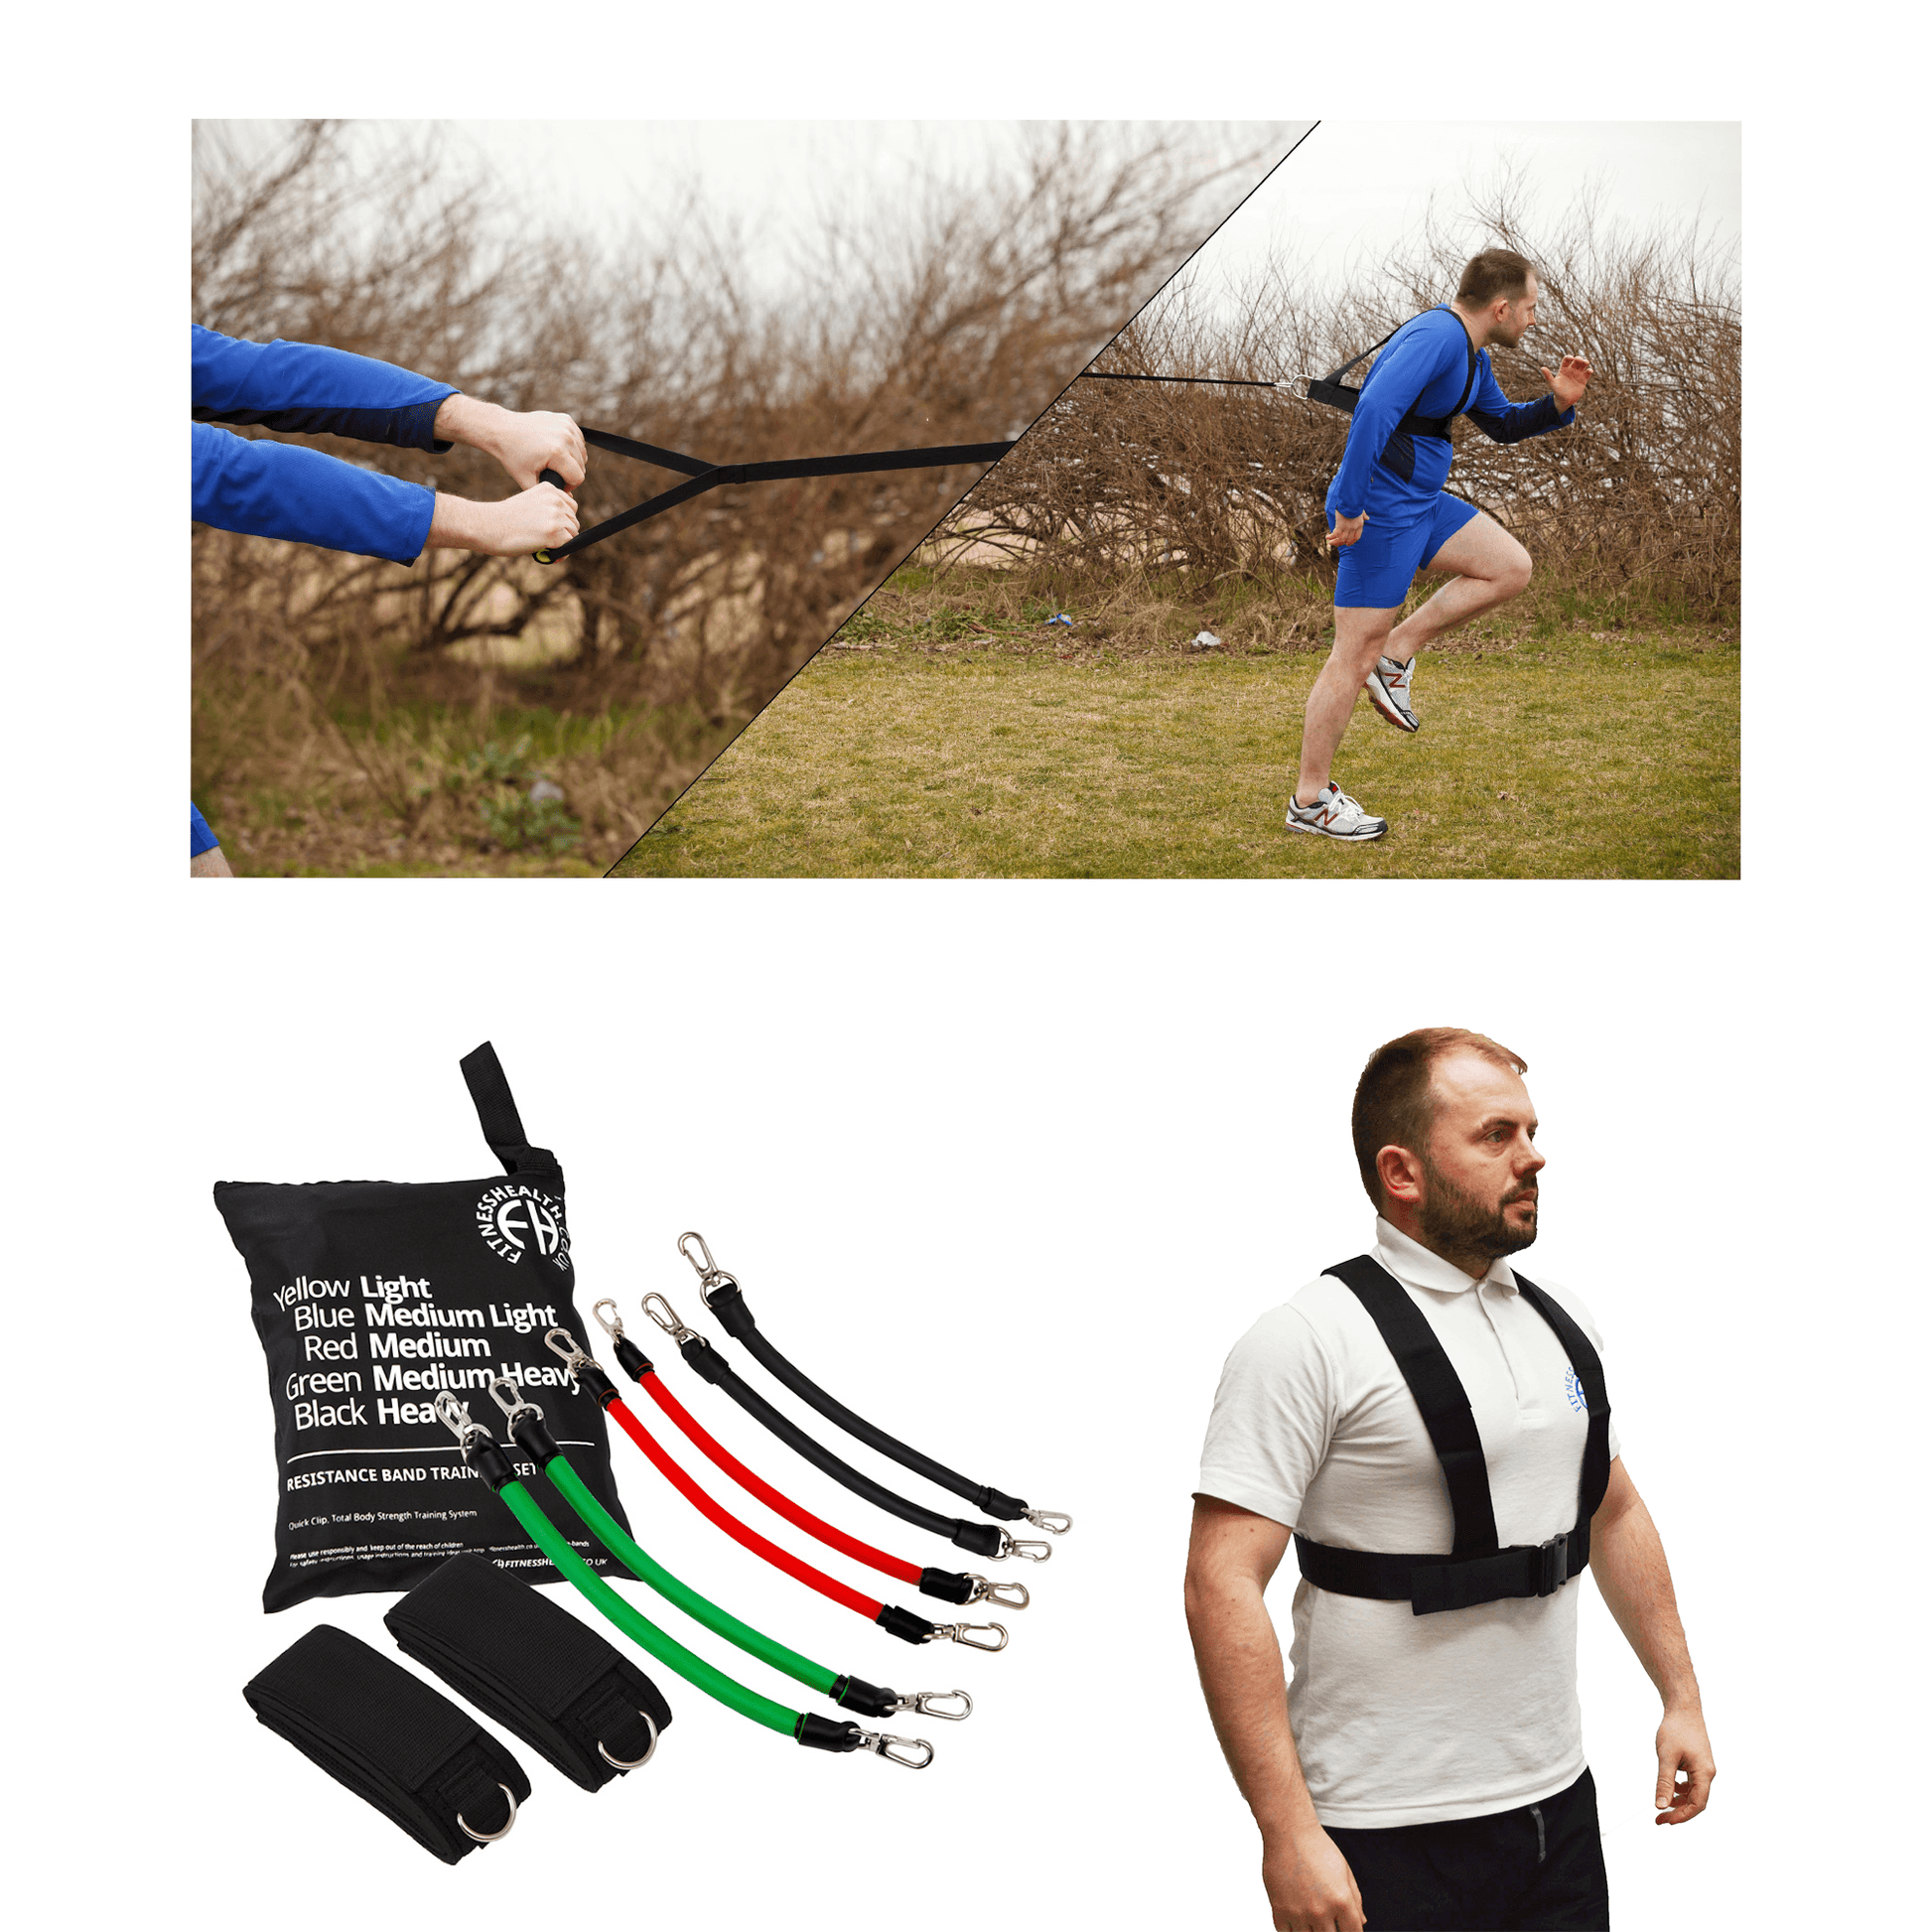 Extreme Sprint Training Harness - Leg Resistance Bands - Fitness Health 